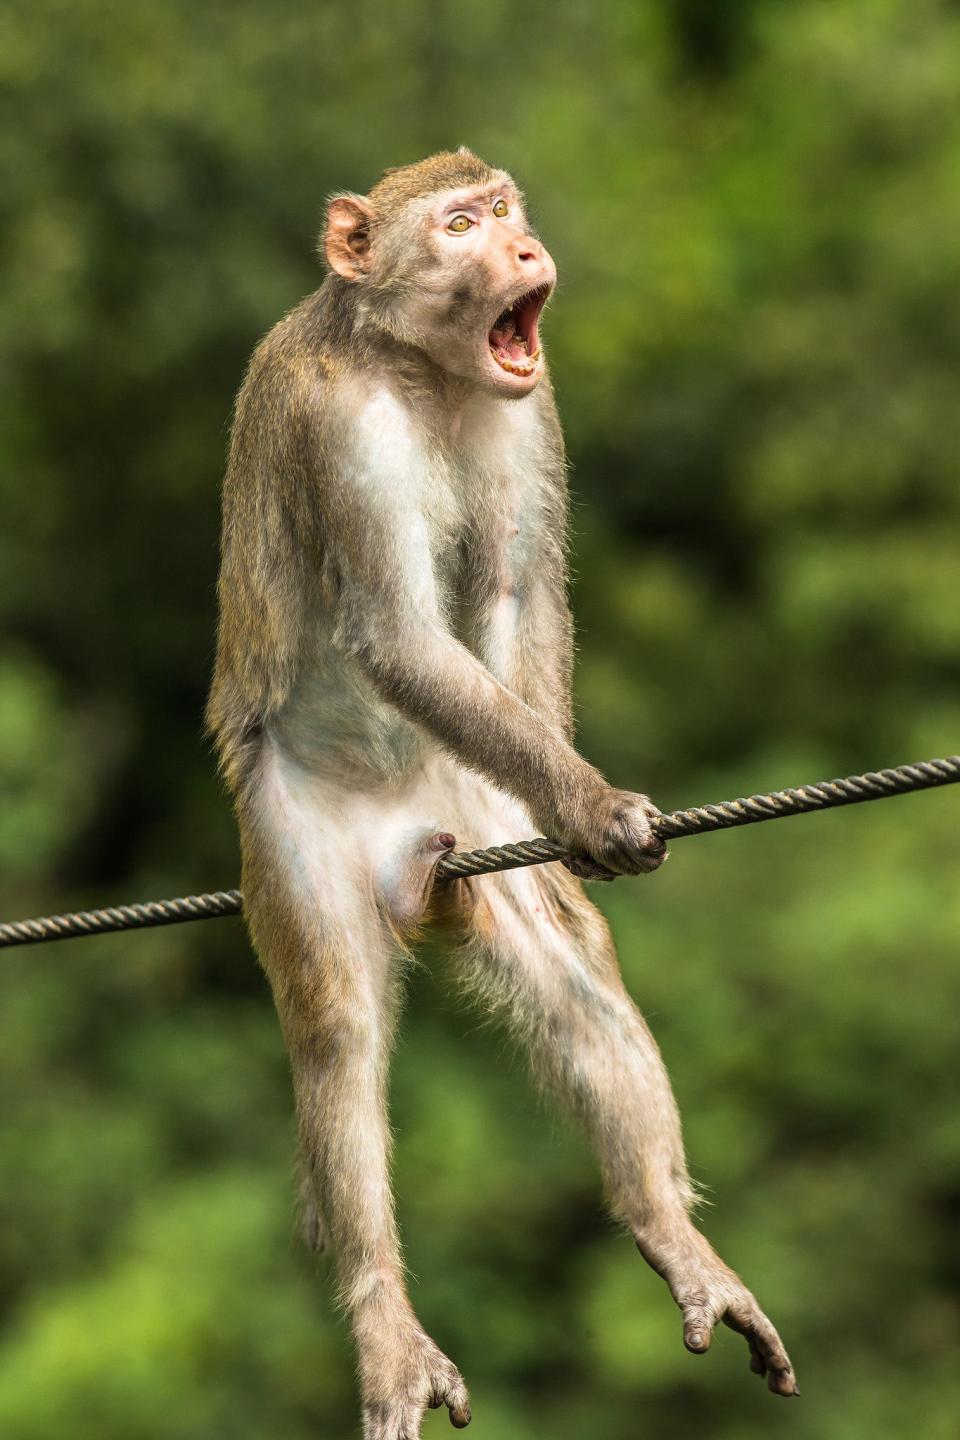 A monkey sits with a rope between its legs. Its facial expression appears pained.